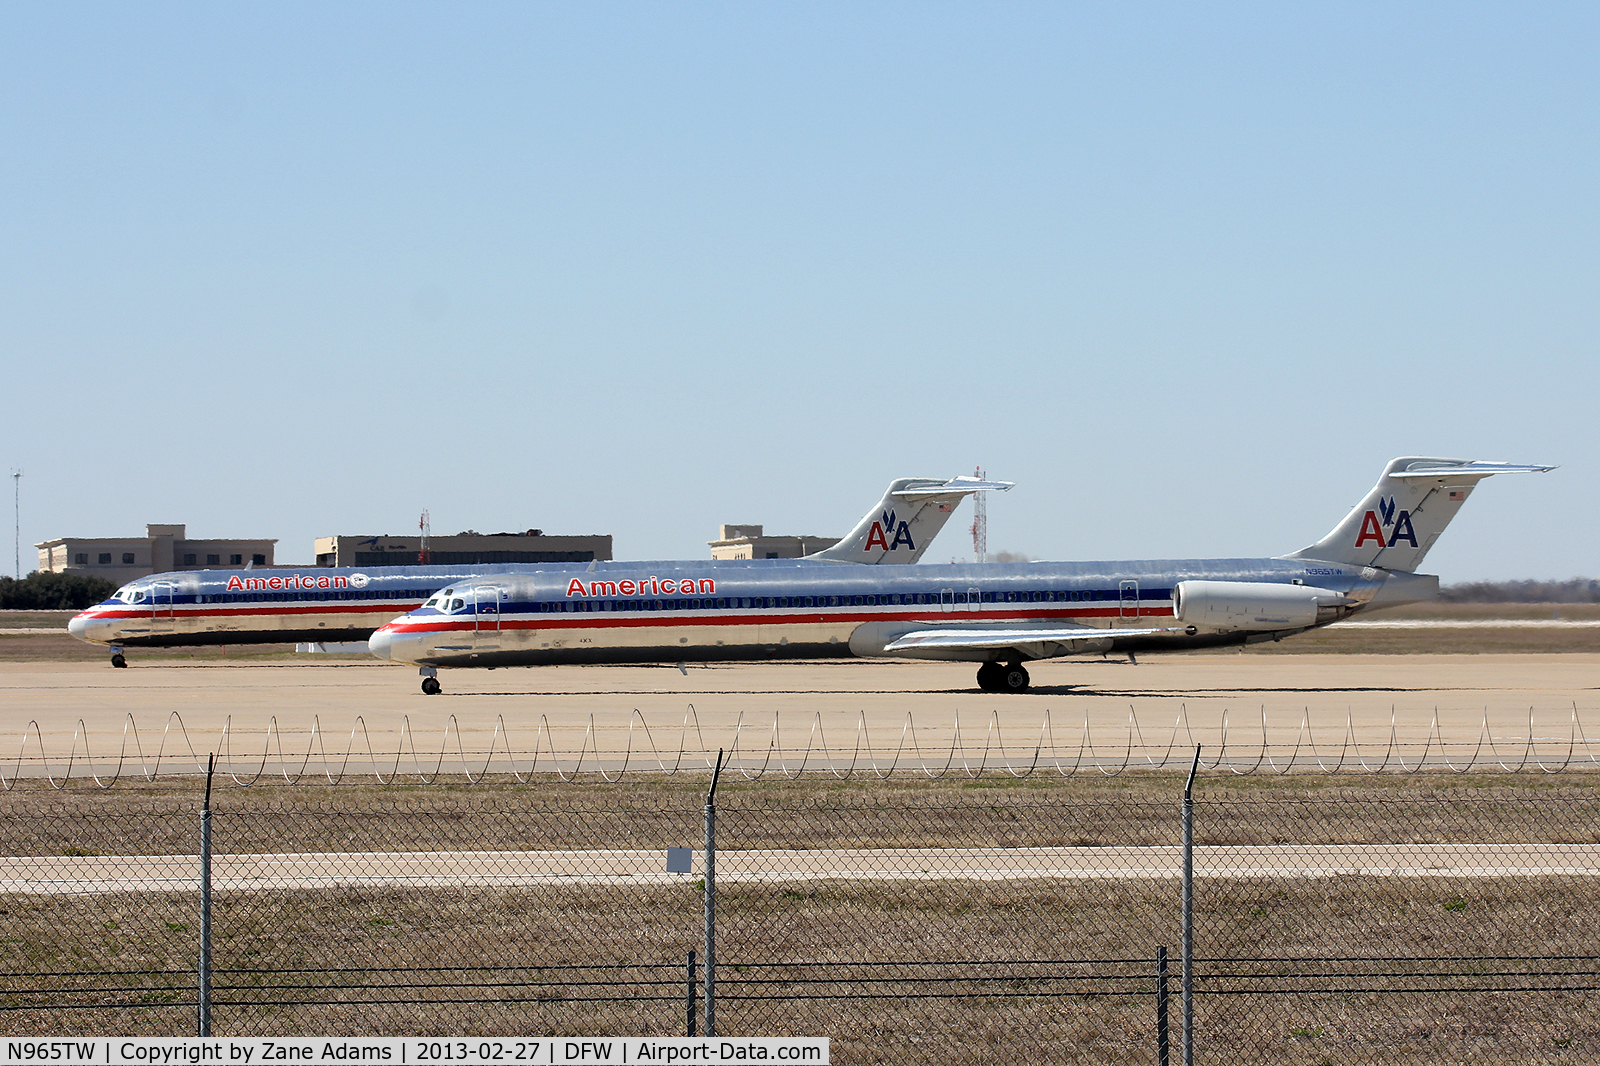 N965TW, 1999 McDonnell Douglas MD-83 (DC-9-83) C/N 53615, American Airlines at DFW Airport